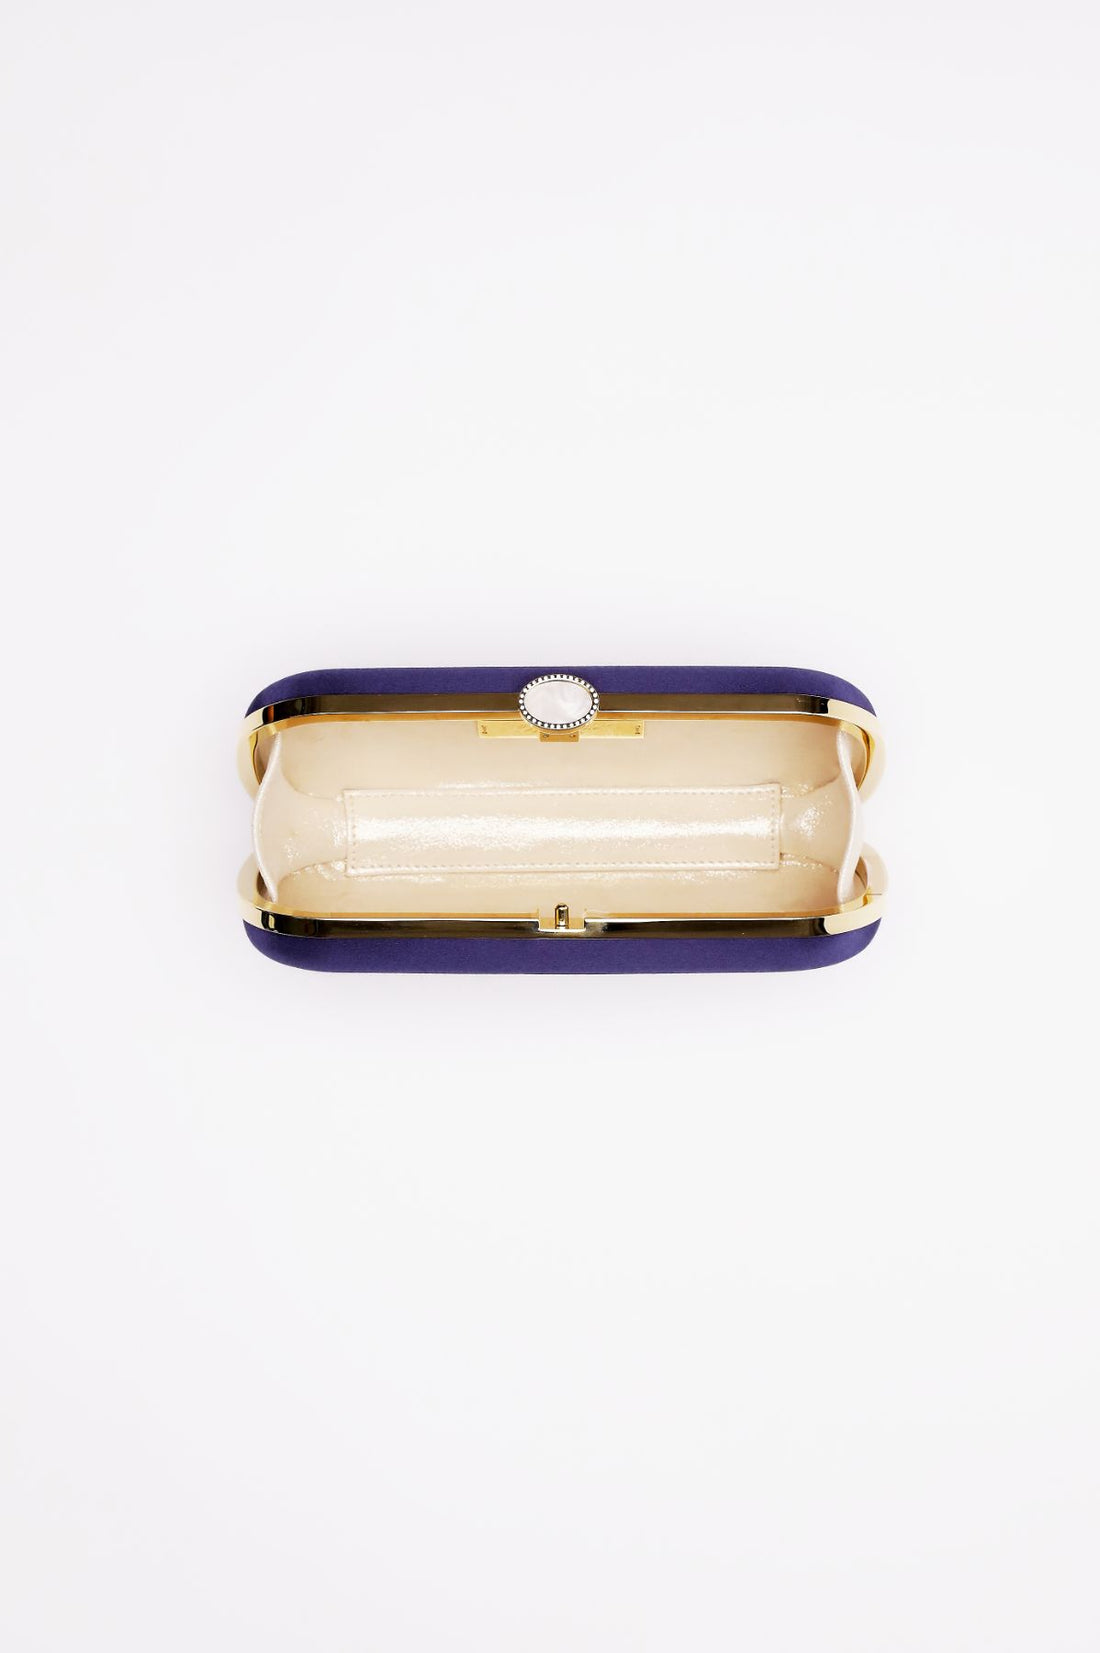 Top open view of Bella Clutch in Navy Blue satin with silver hardware frame.